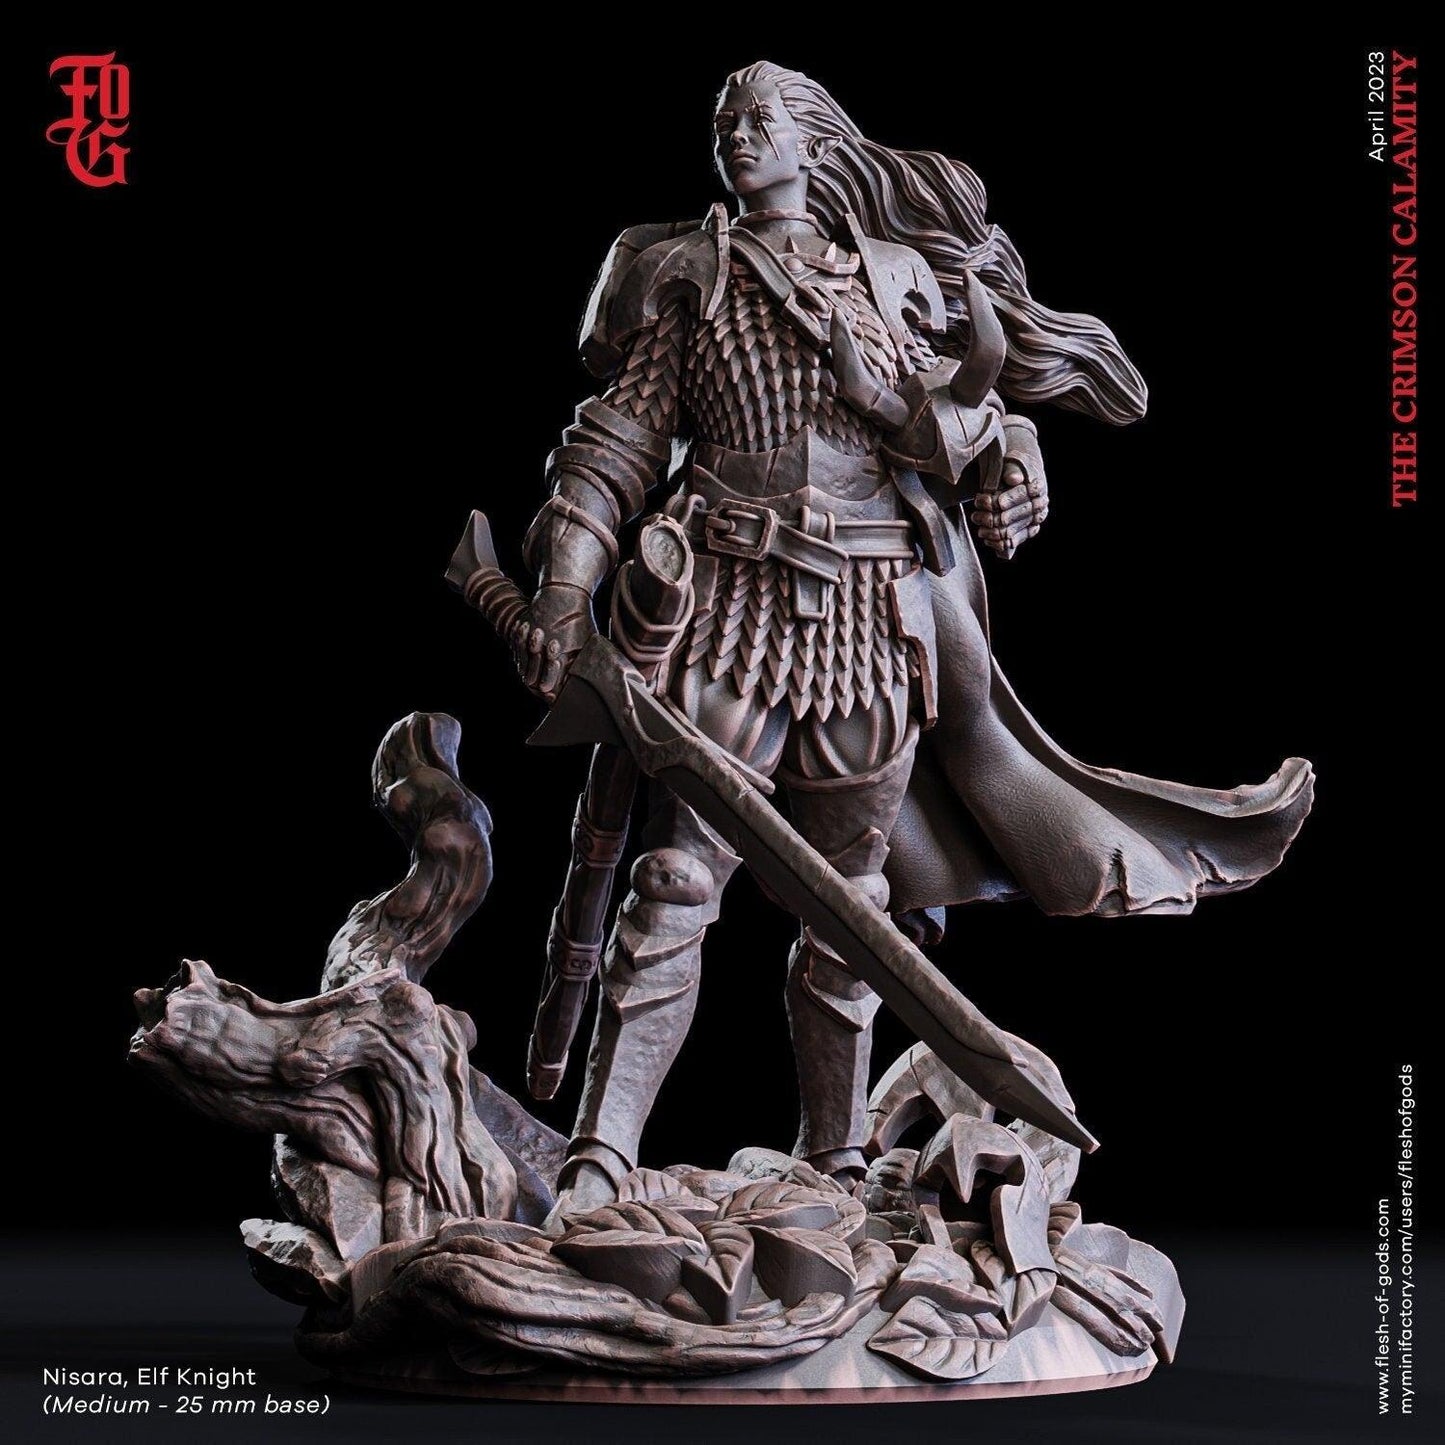 DnD Elf Knight Miniature Warrior Paladin Fighter | 25mm Base 75mm Scale | DnD Miniature Dungeons and Dragons DnD 5e class elf miniature - Plague Miniatures shop for DnD Miniatures